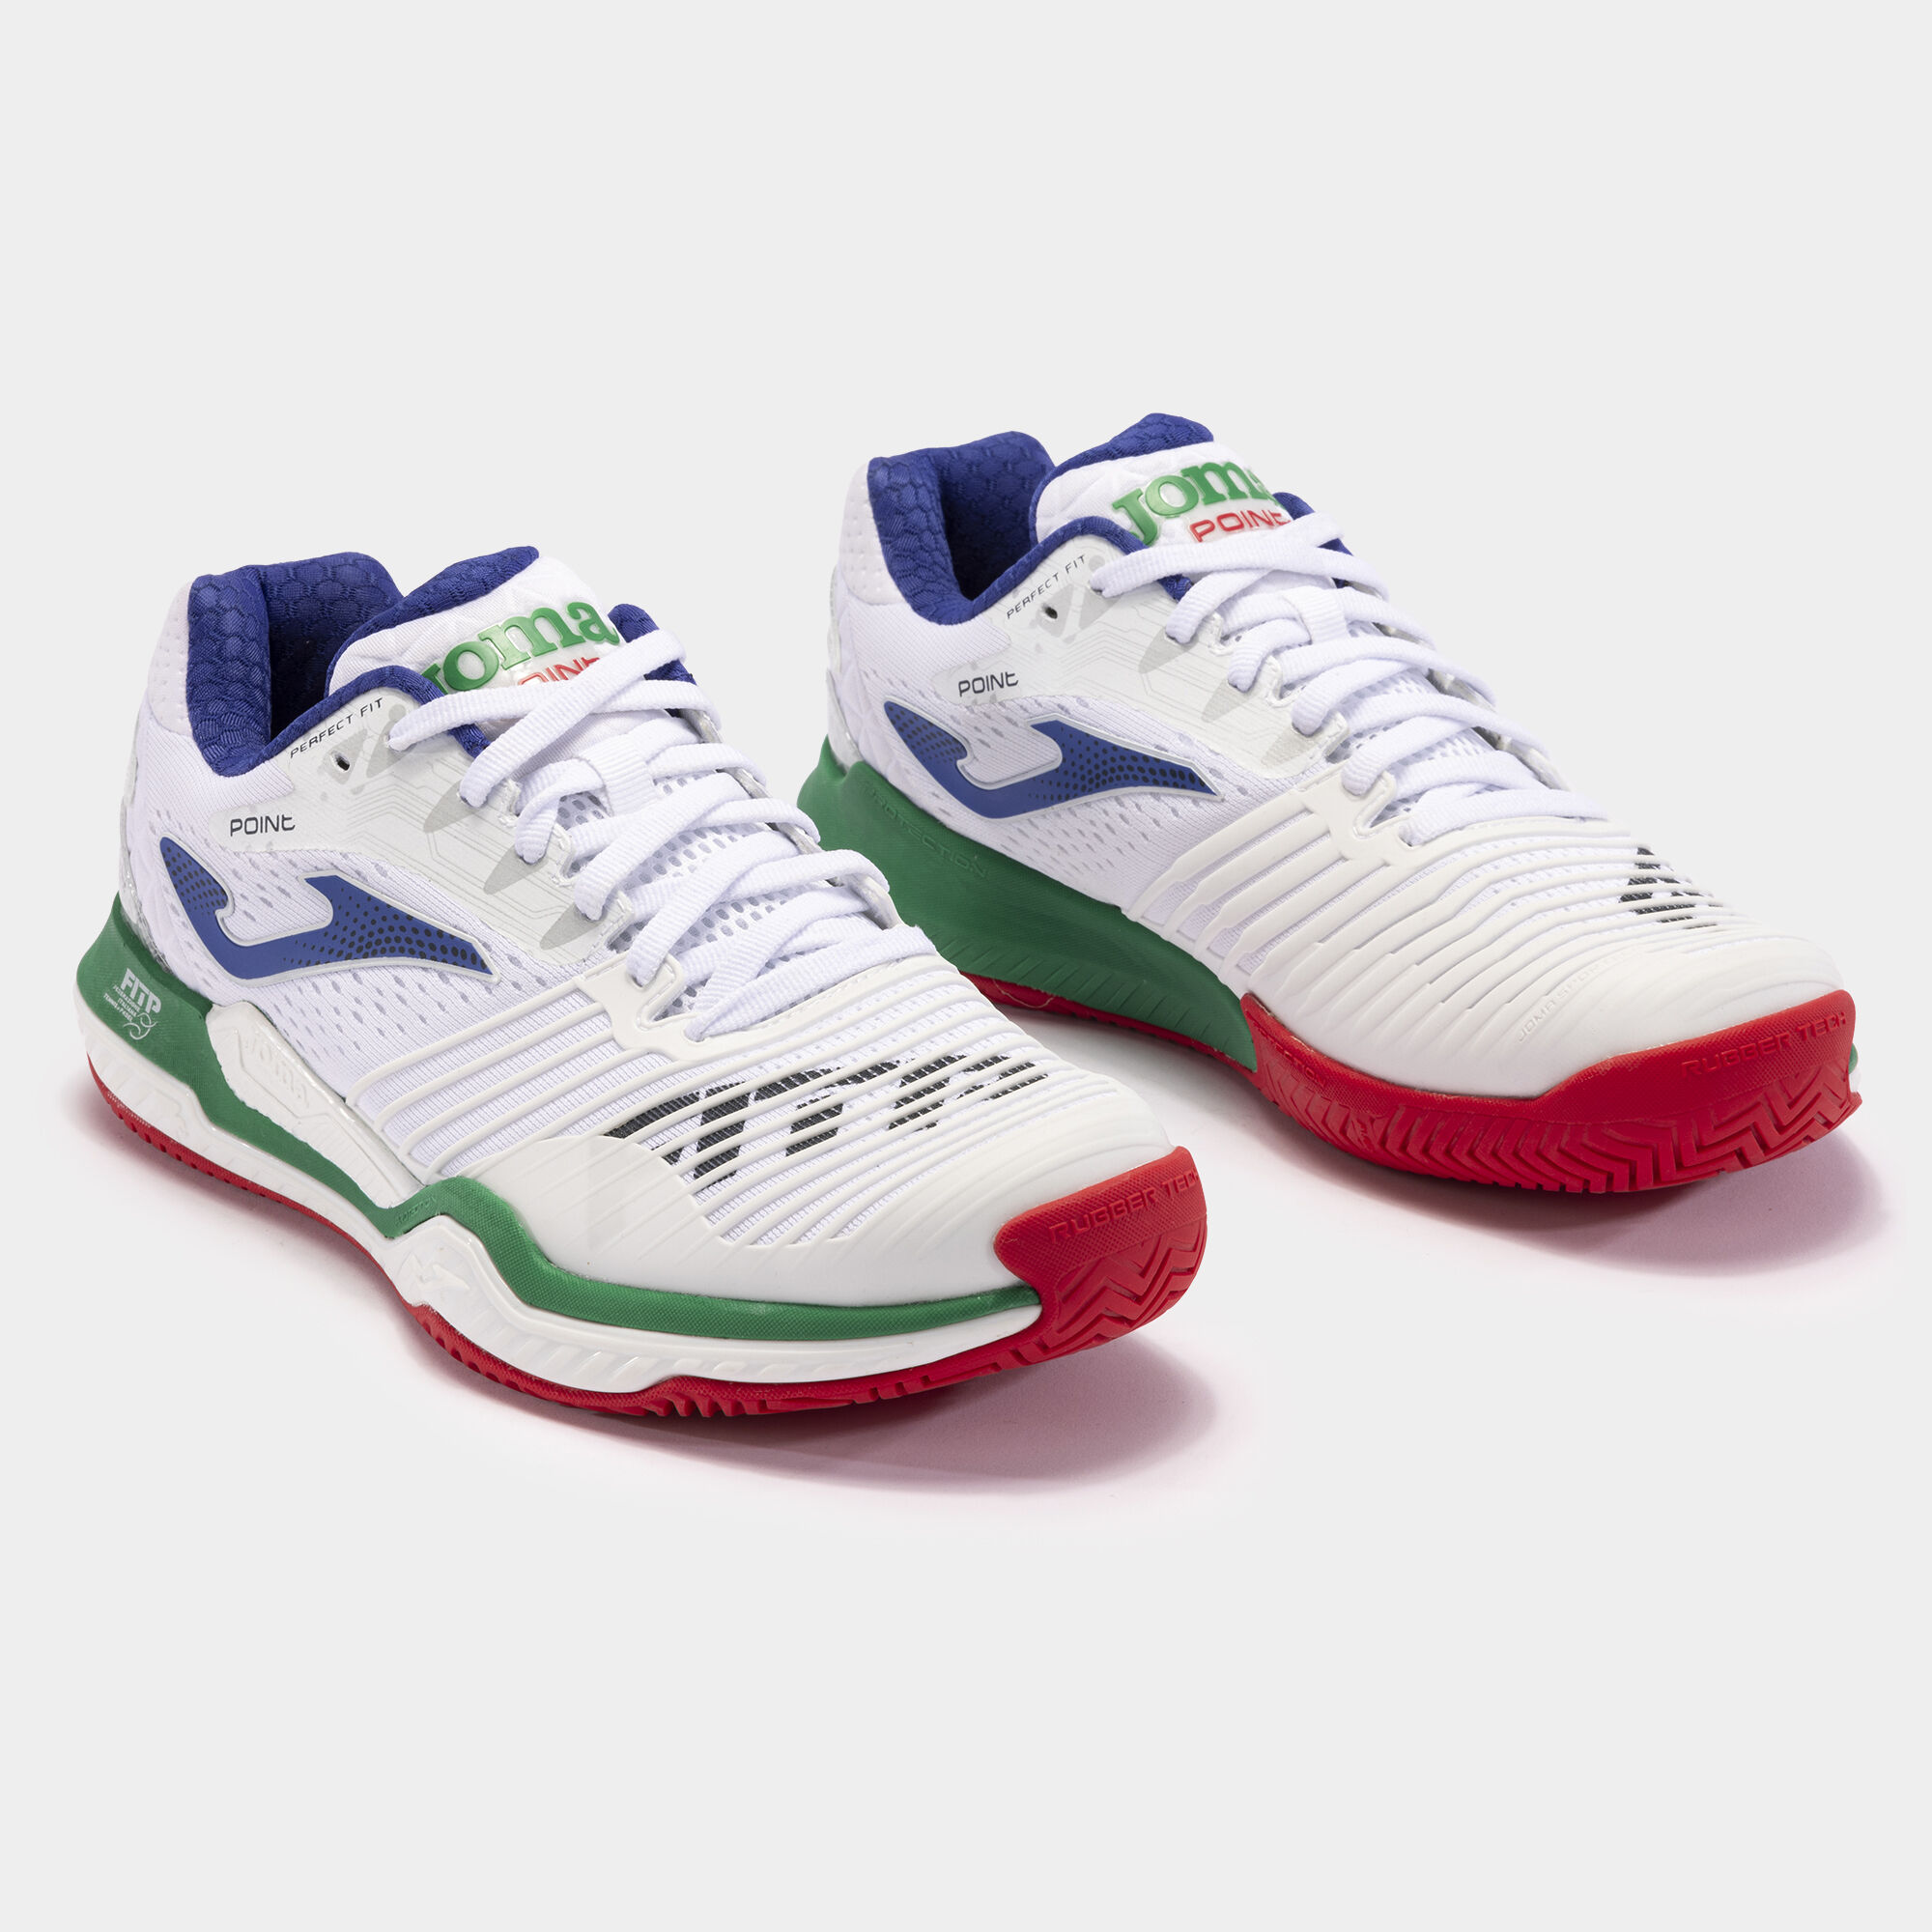 Shoes Point 24 Italian Tennis And Padel Federation clay unisex white blue